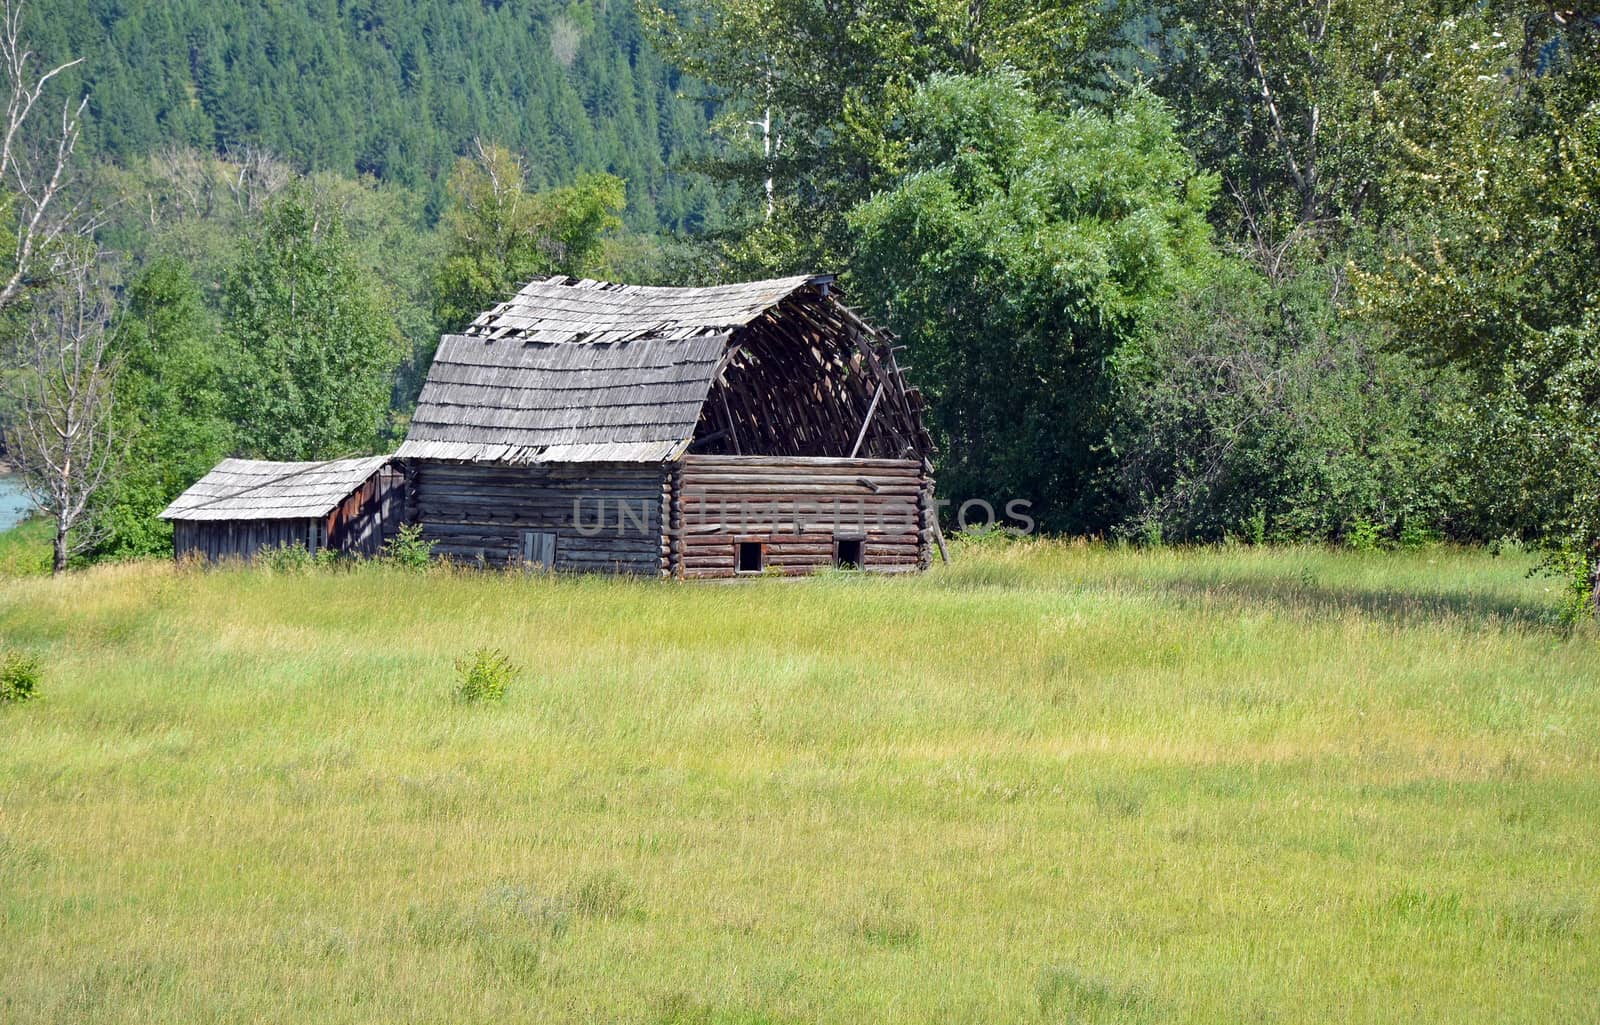 Old abandoned wooden barn in grassy meadow